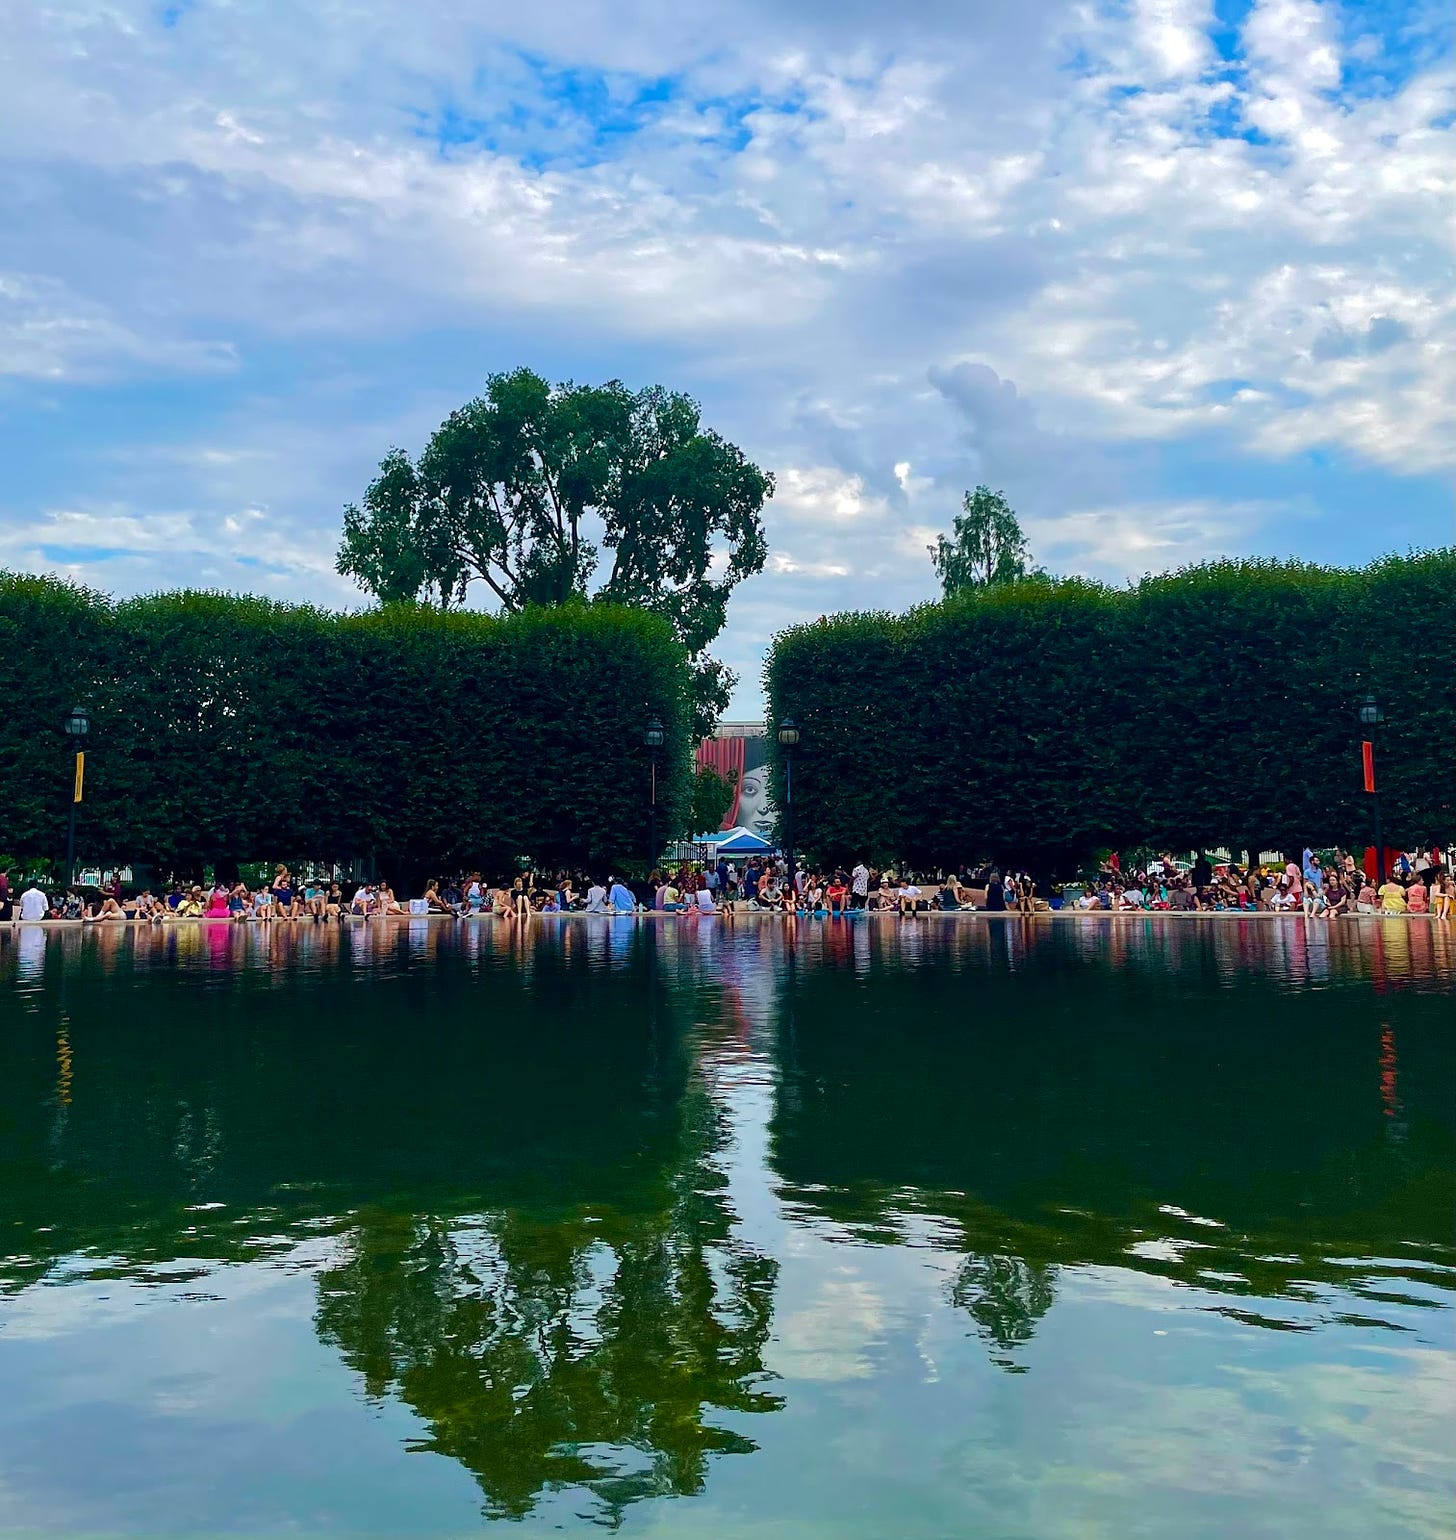 National Sculpture Garden, Washington DC, July 2022, a blue sky and green water reflecting the blue sky, people are sitting around the water, and big bushes are behind them. In between the bushes there is a painting of a women peering out